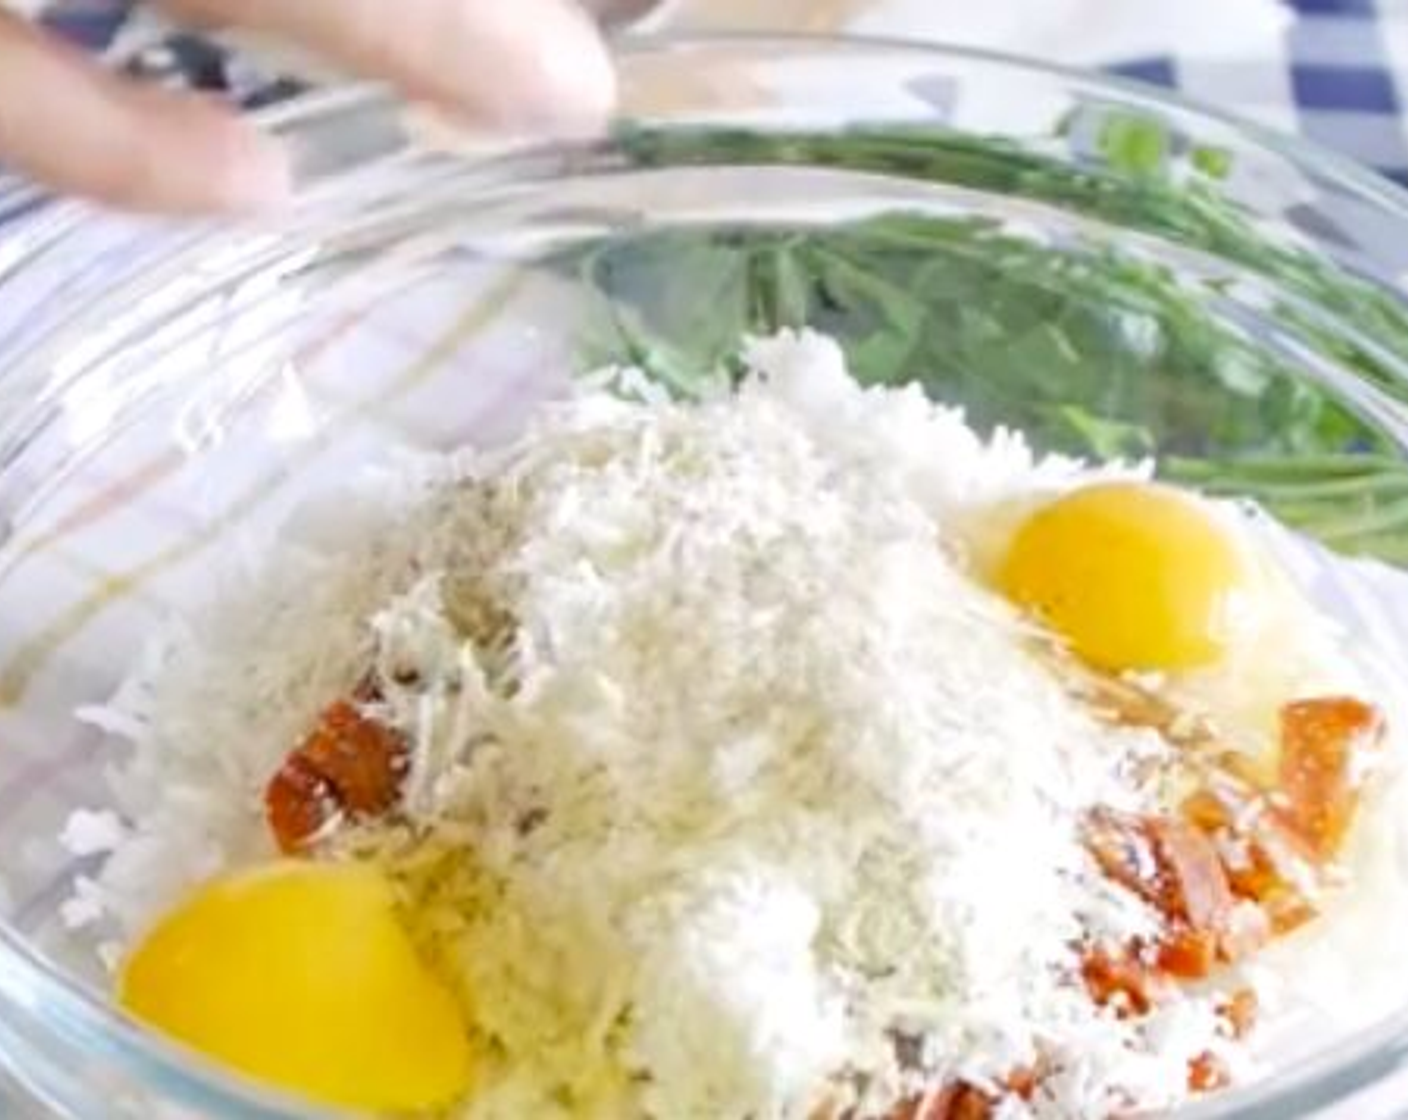 step 1 In a bowl, mix the White Rice (2 cups), Spanish Chorizo (2 oz), Free Range Egg (3), Feta Cheese (1 cup), Parmesan Cheese (1/4 cup), Ground Black Pepper (1/2 tsp), Salt (1/2 Tbsp), Fresh Chives (15 stalks), and All-Purpose Flour (1 Tbsp) if using.